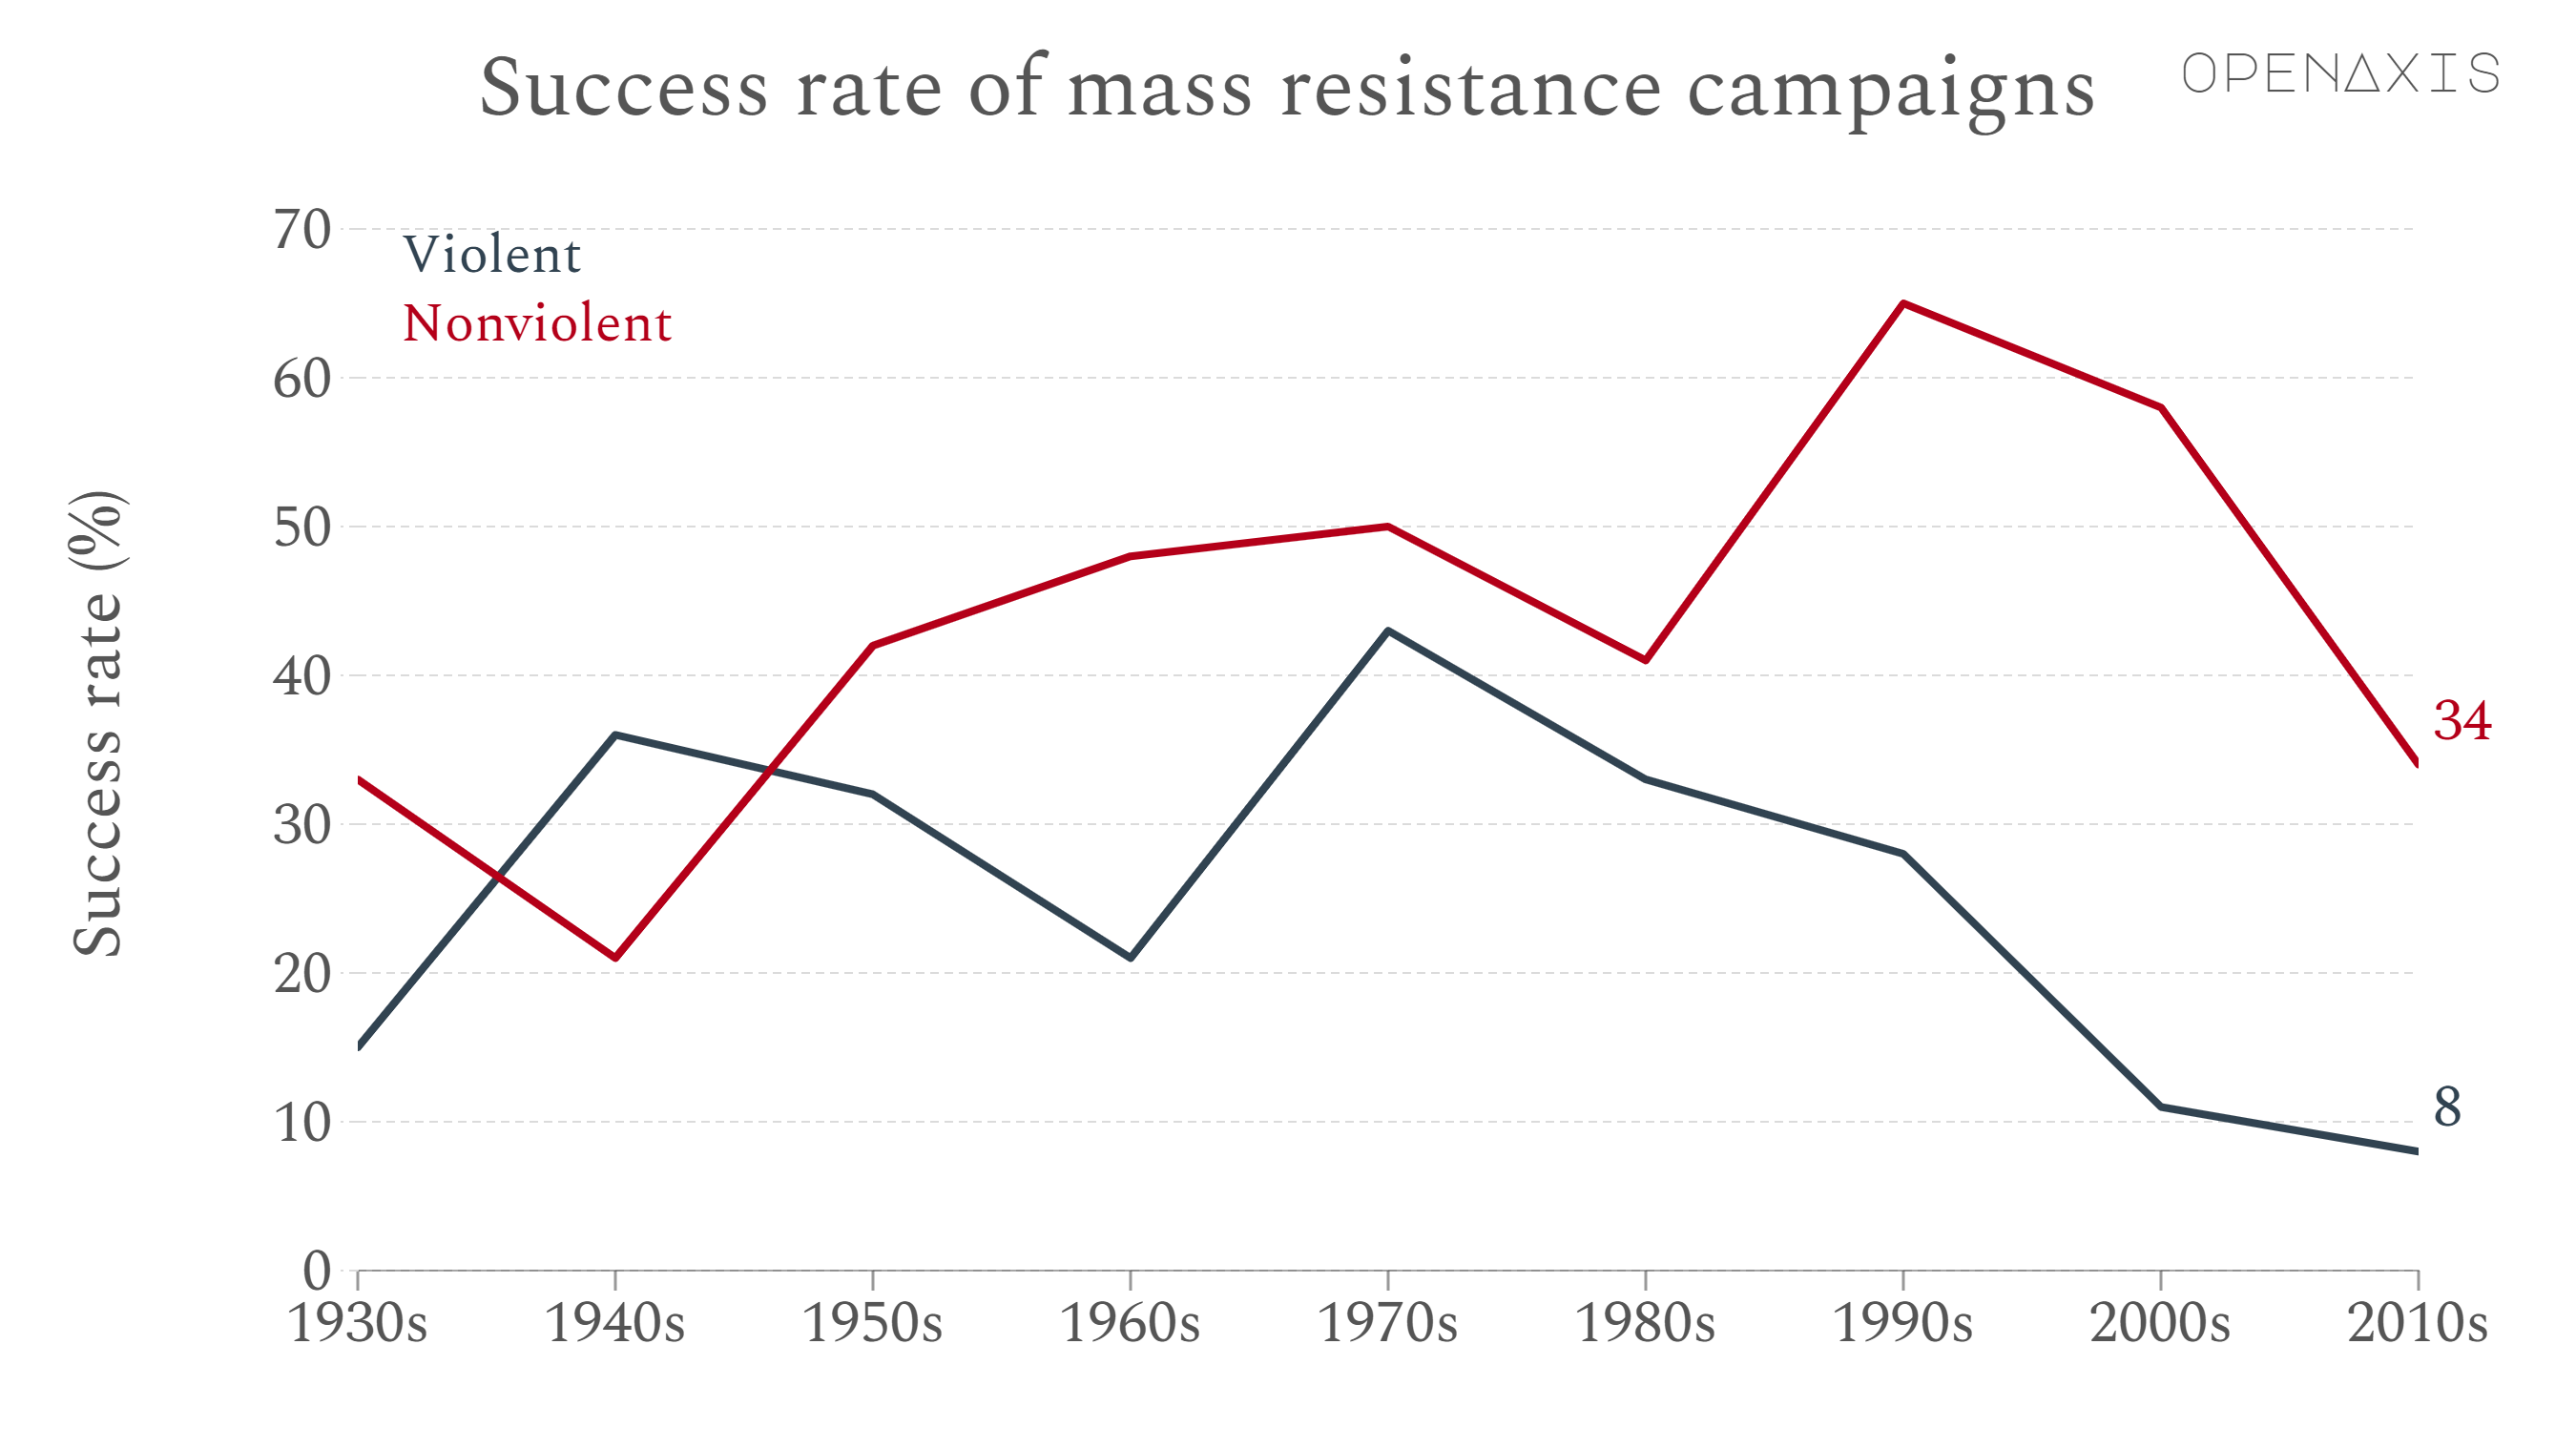 "Success rate of mass resistance campaigns"